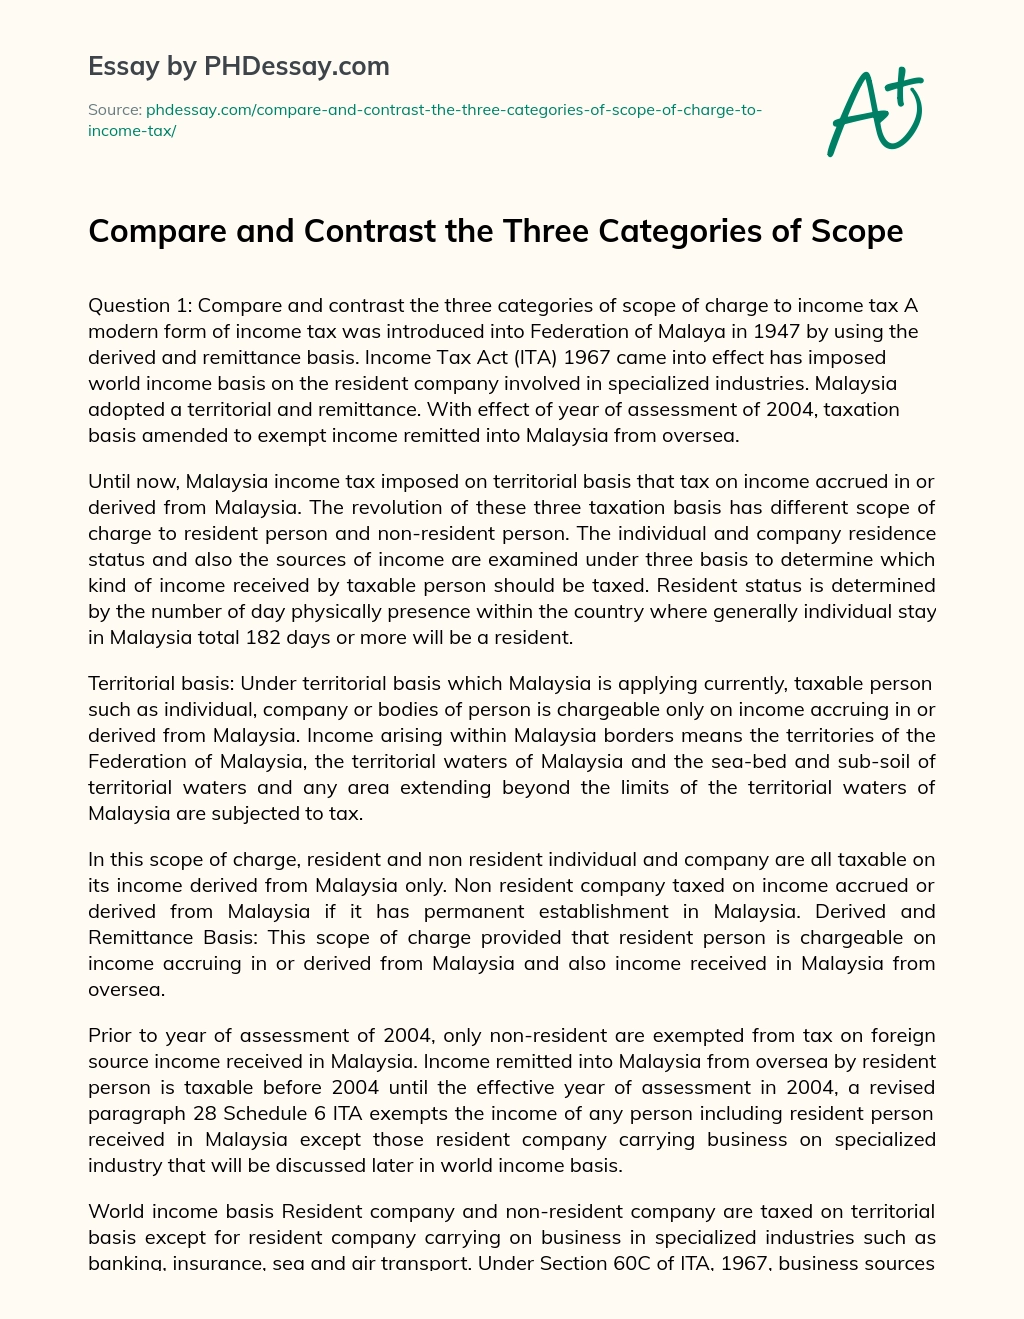 Compare and Contrast the Three Categories of Scope essay